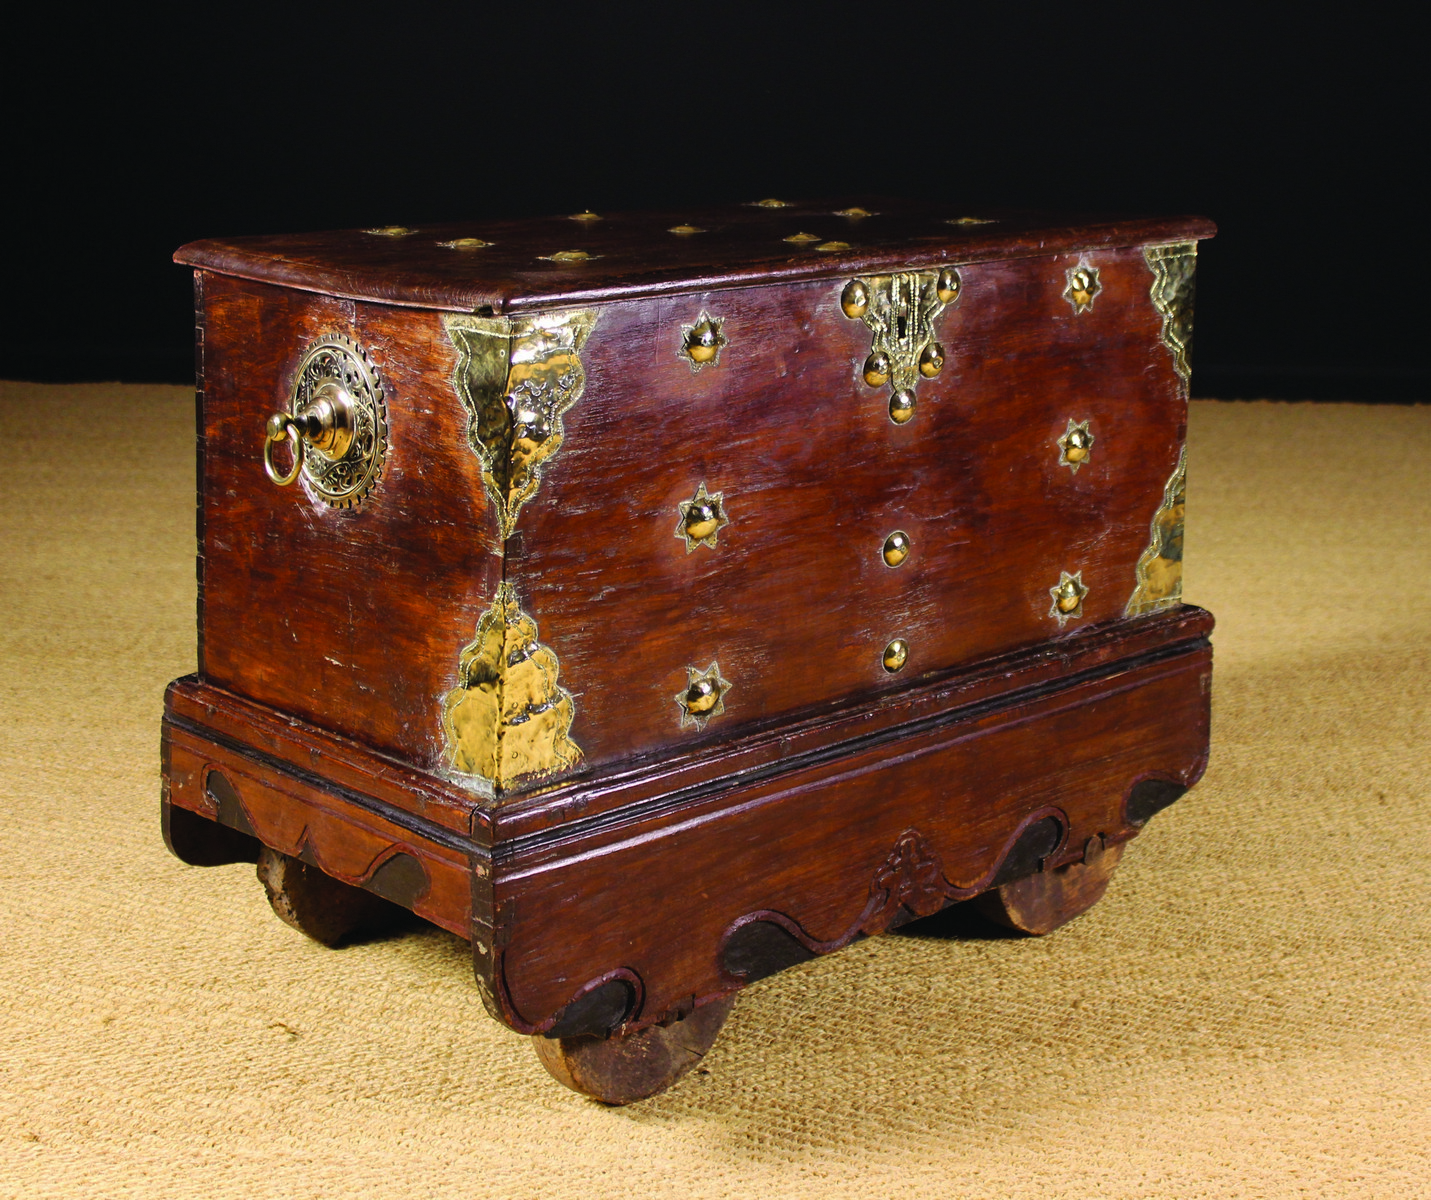 A 19th Century Dutch Colonial Chest on Wheels with decorative brass appliqués.